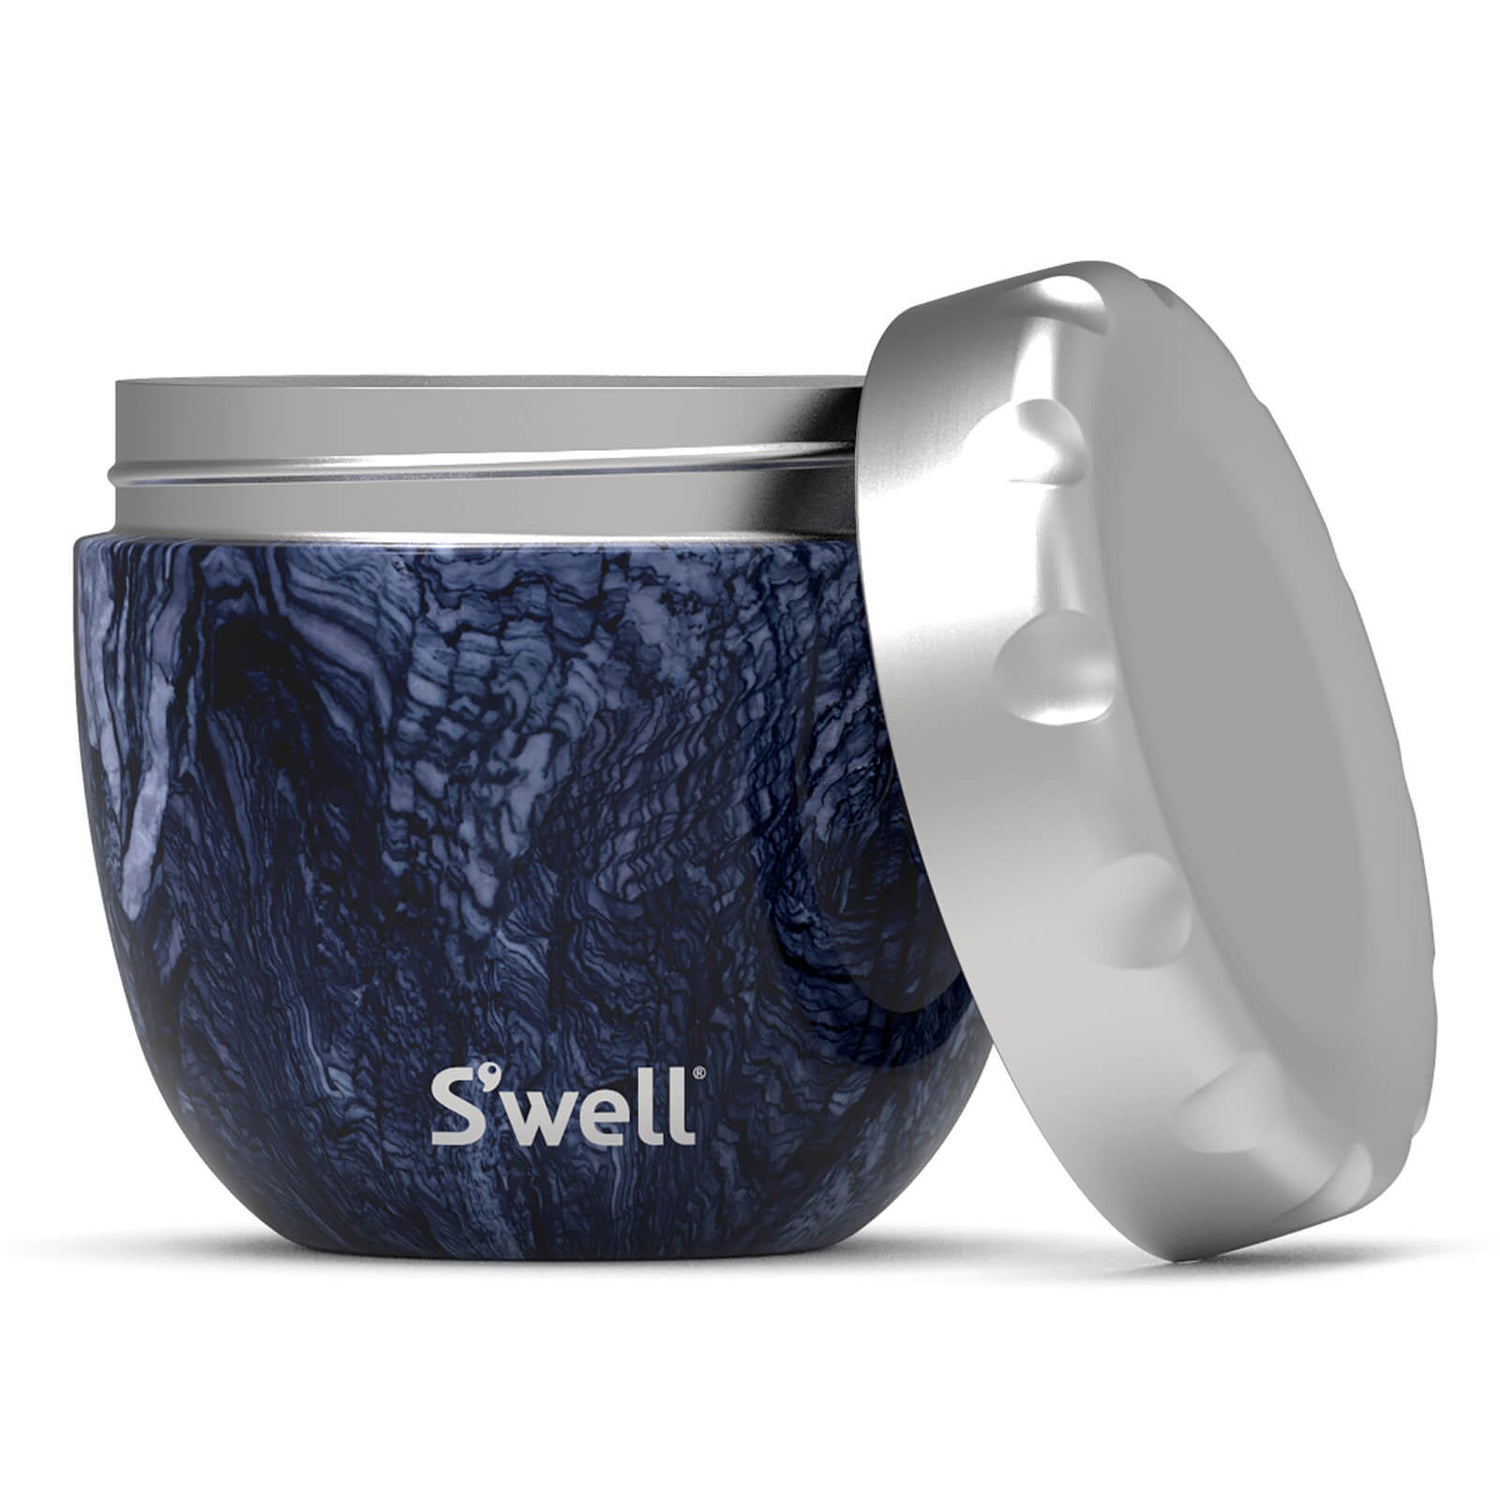 S'well Eats 2 in 1 Azurite Marble Nesting Food Bowl - Large